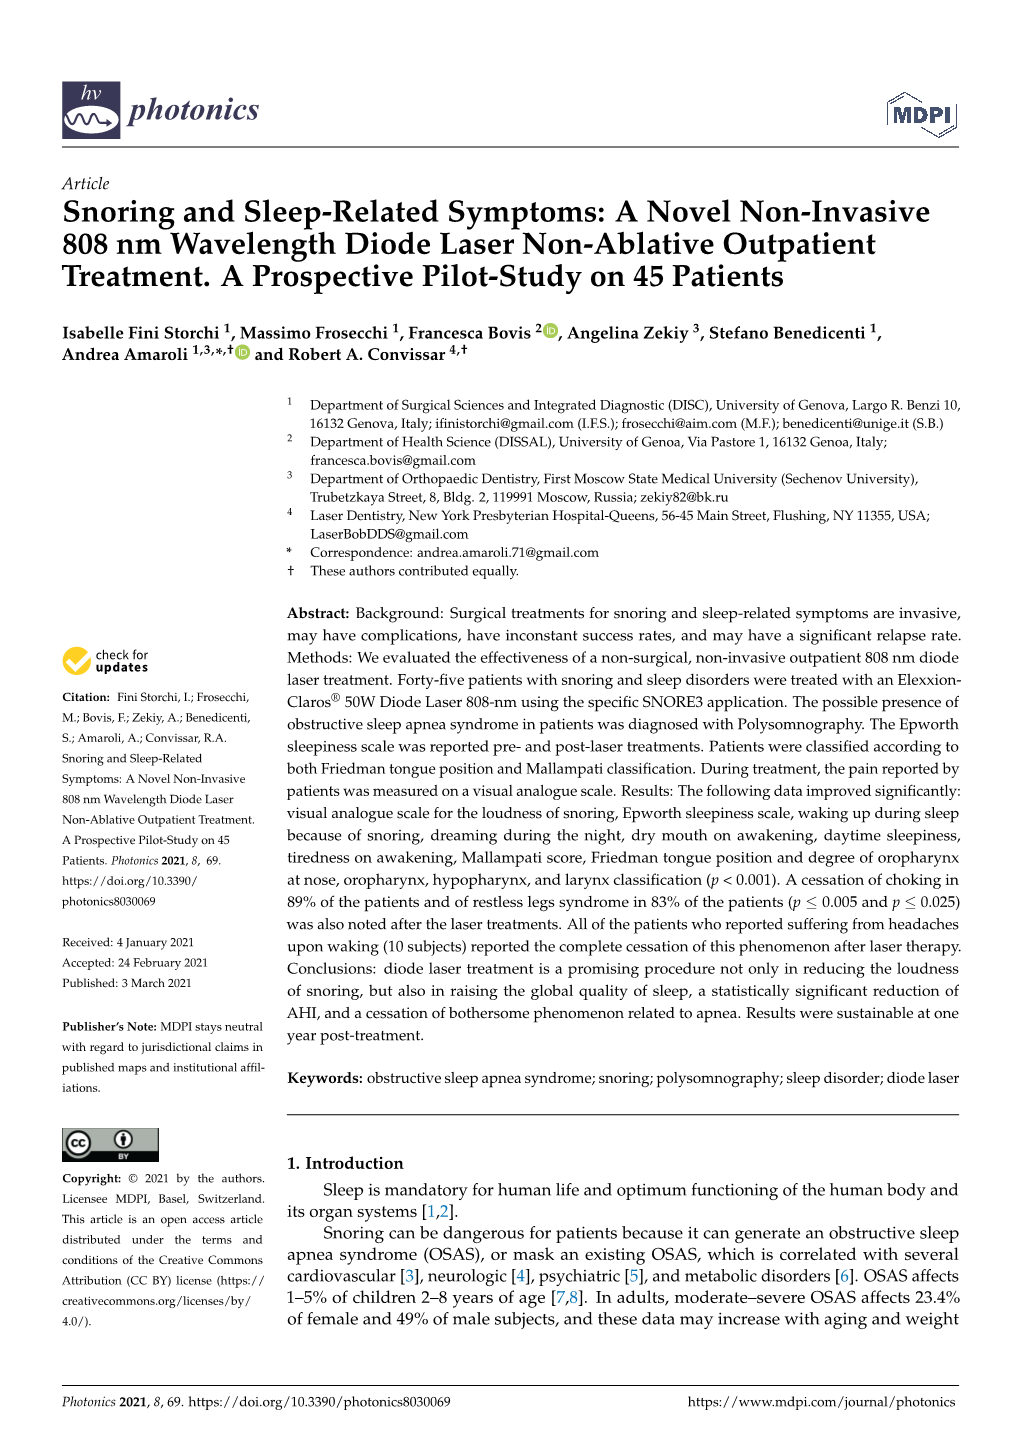 Snoring and Sleep-Related Symptoms: a Novel Non-Invasive 808 Nm Wavelength Diode Laser Non-Ablative Outpatient Treatment